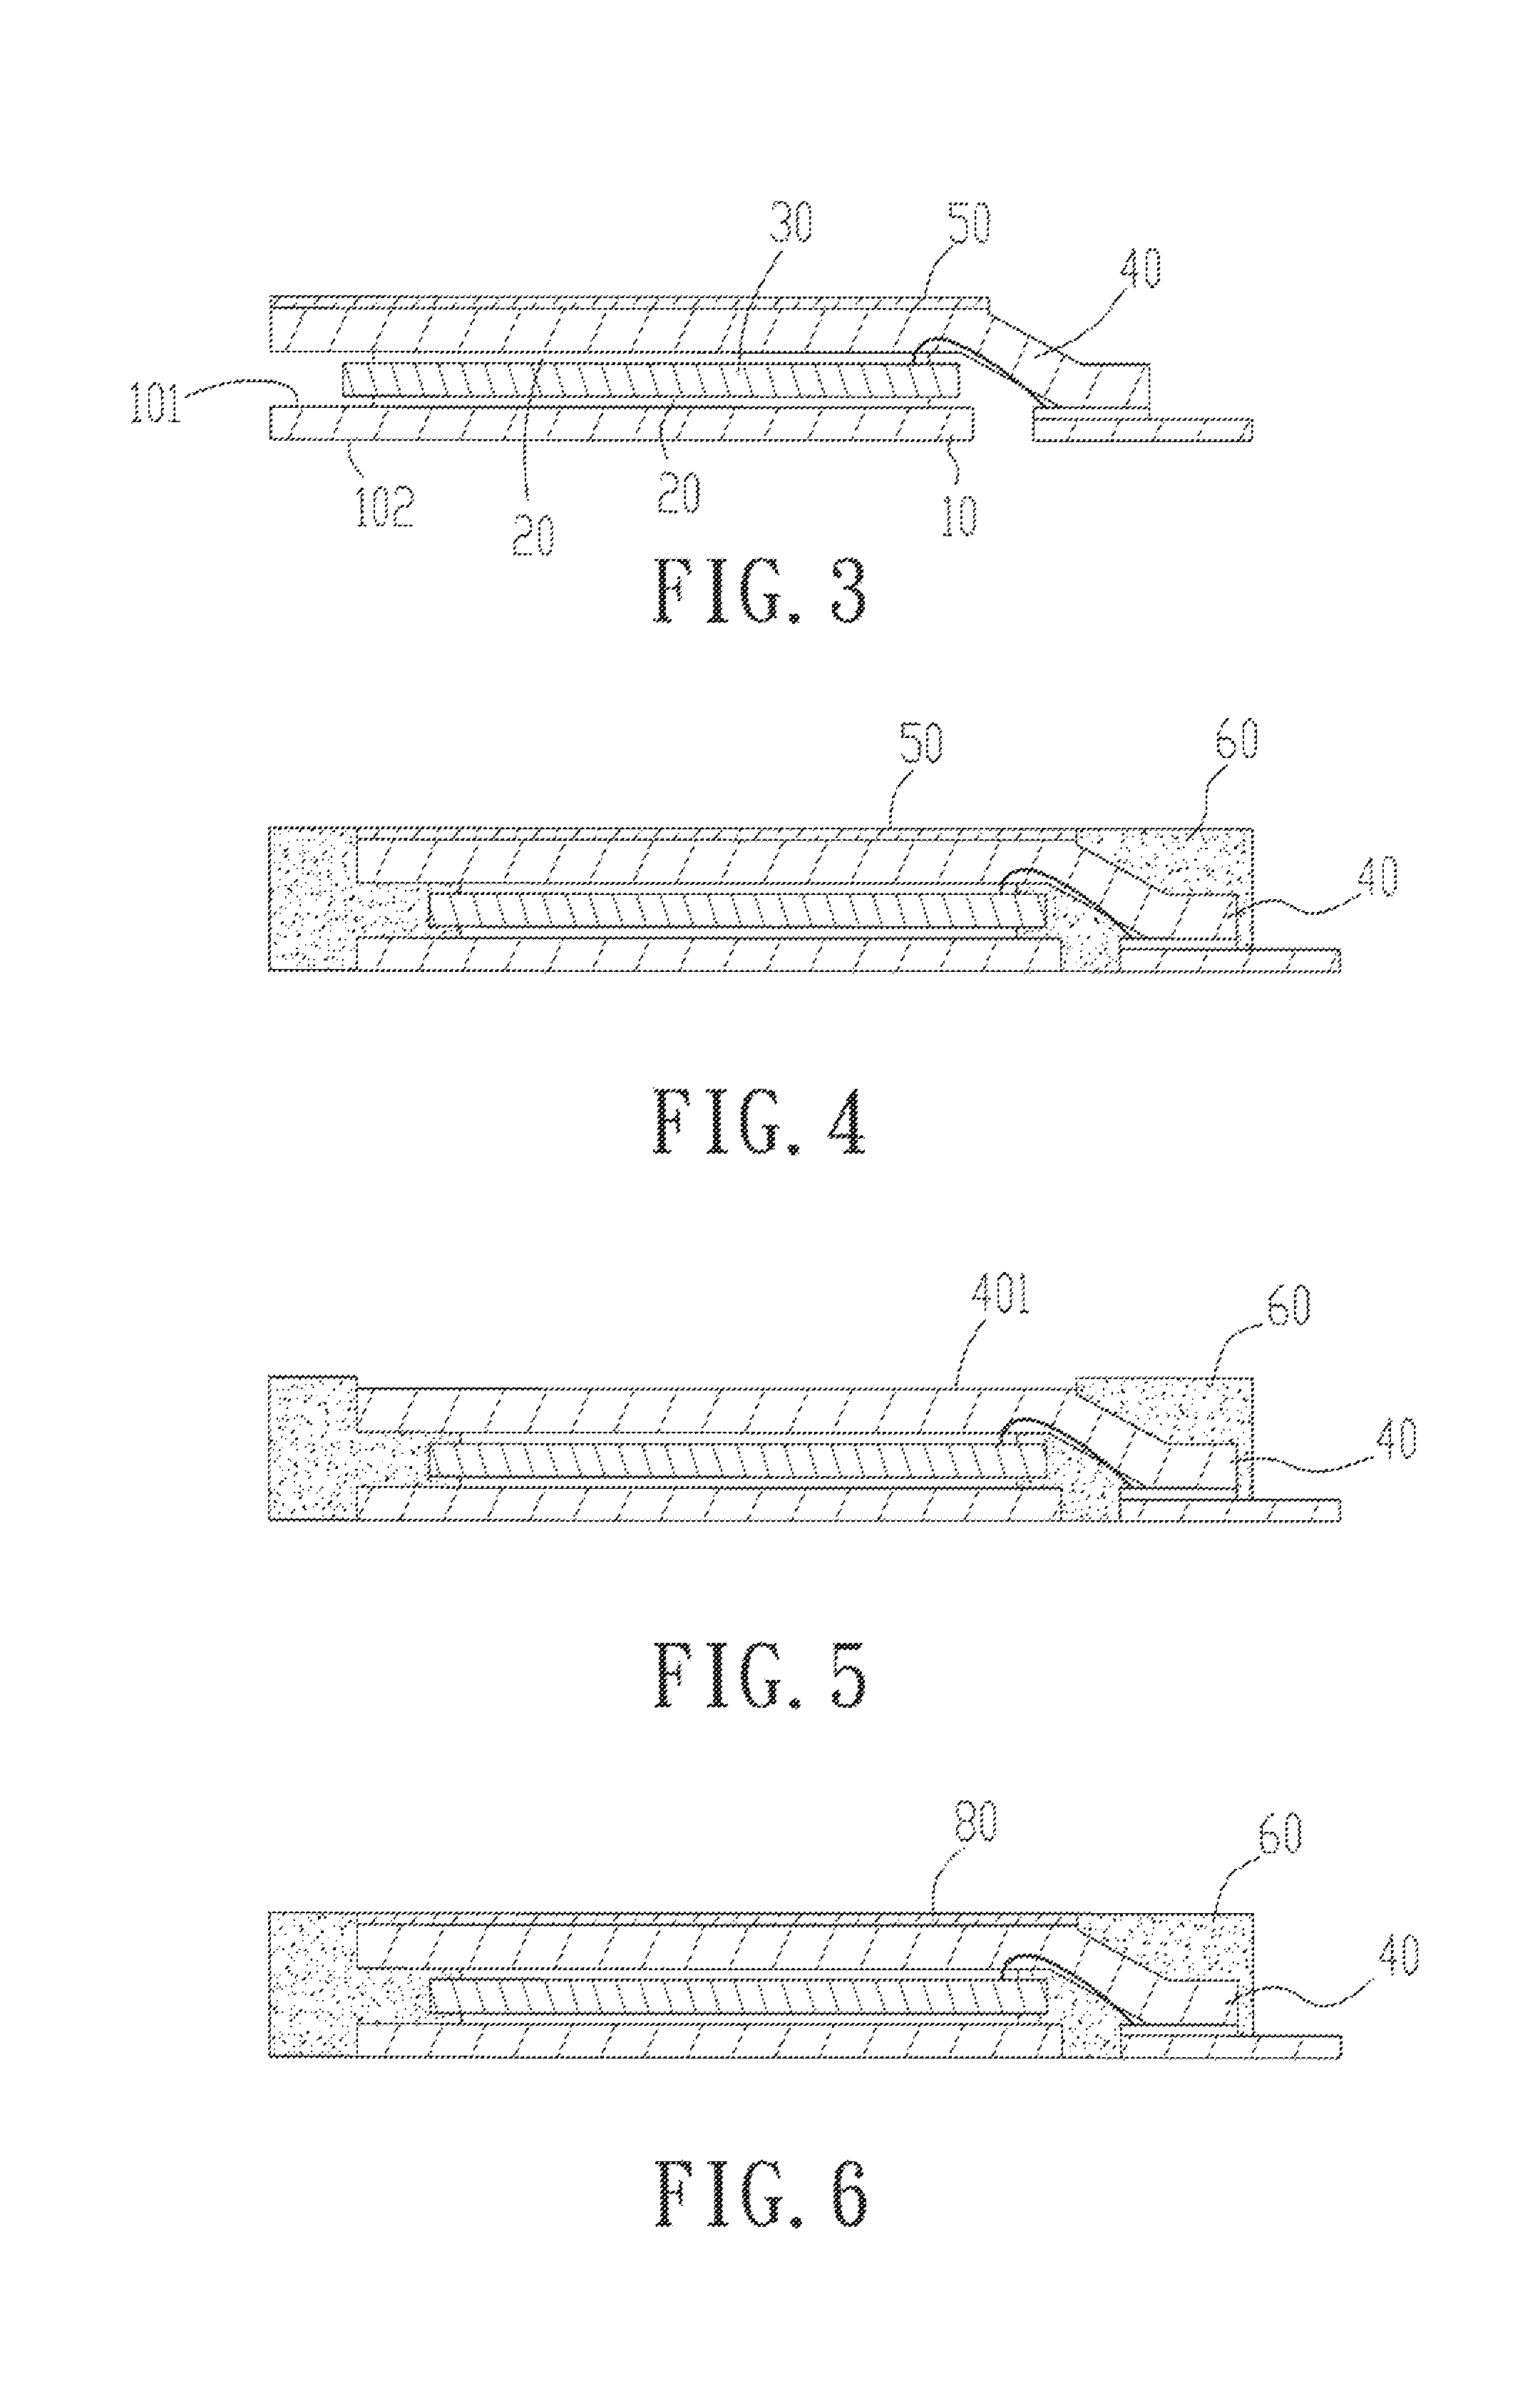 High heat-dissipation chip package structure